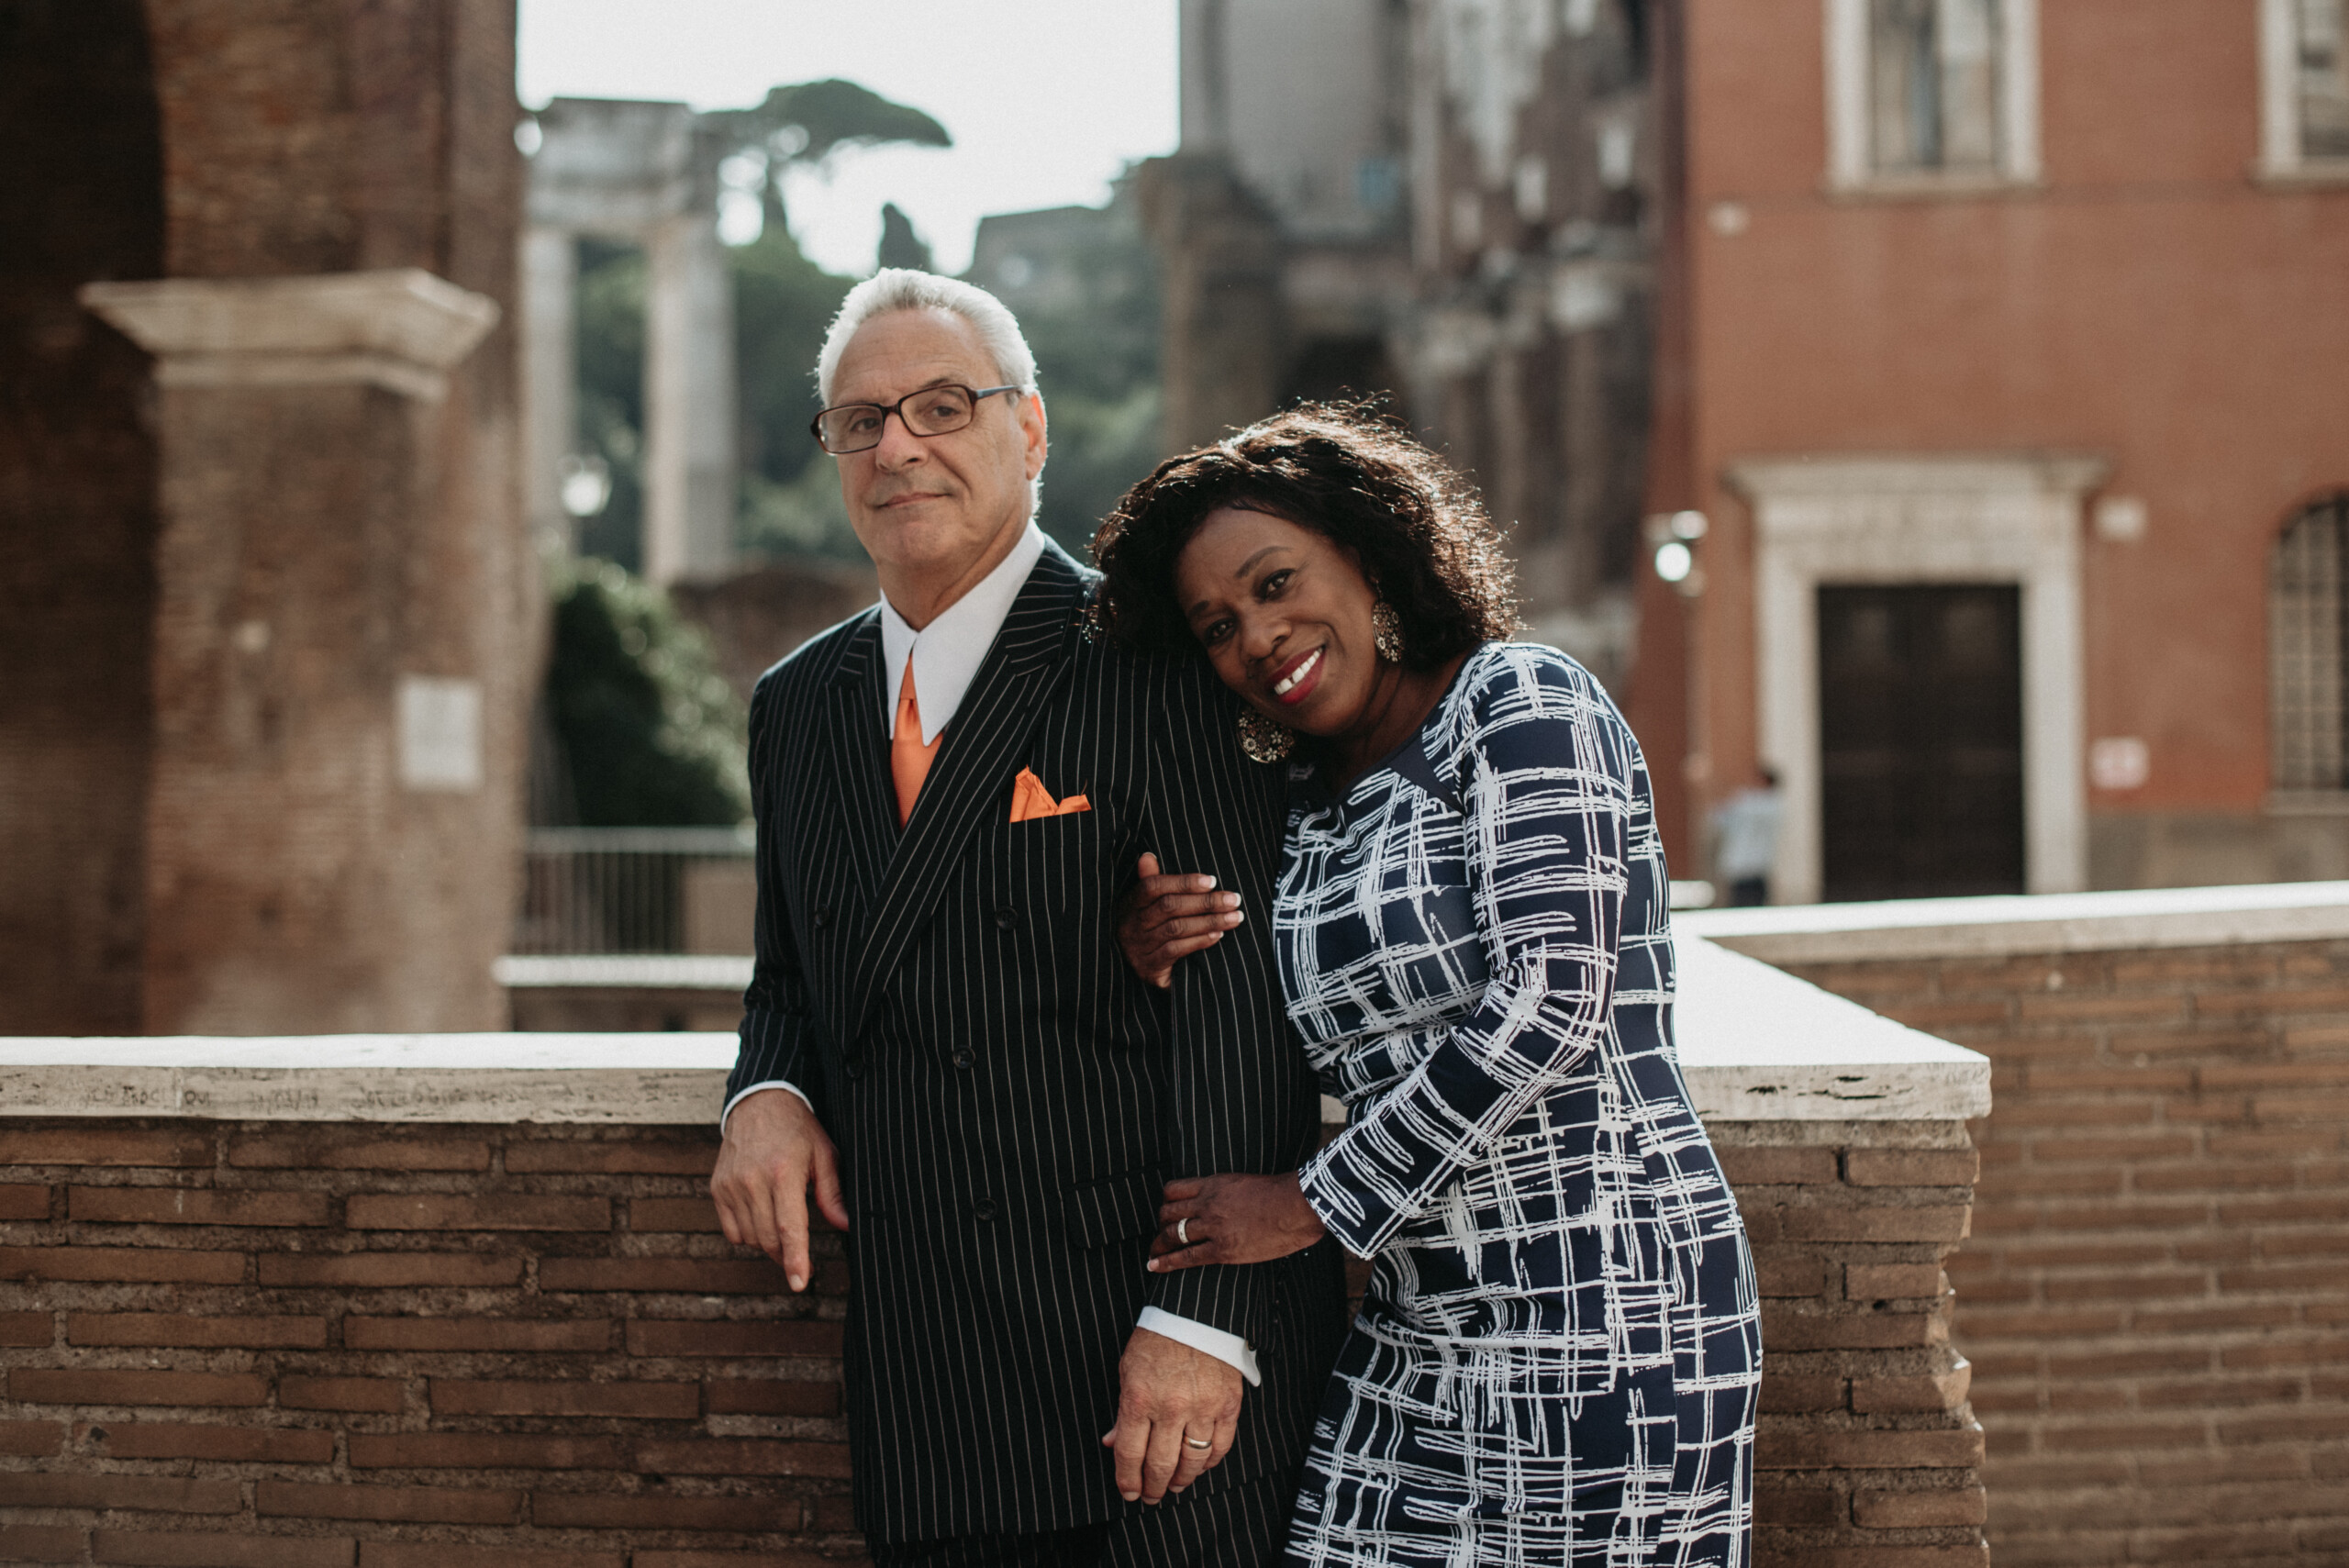 Couple's photoshoot by Polina, Localgrapher in Rome